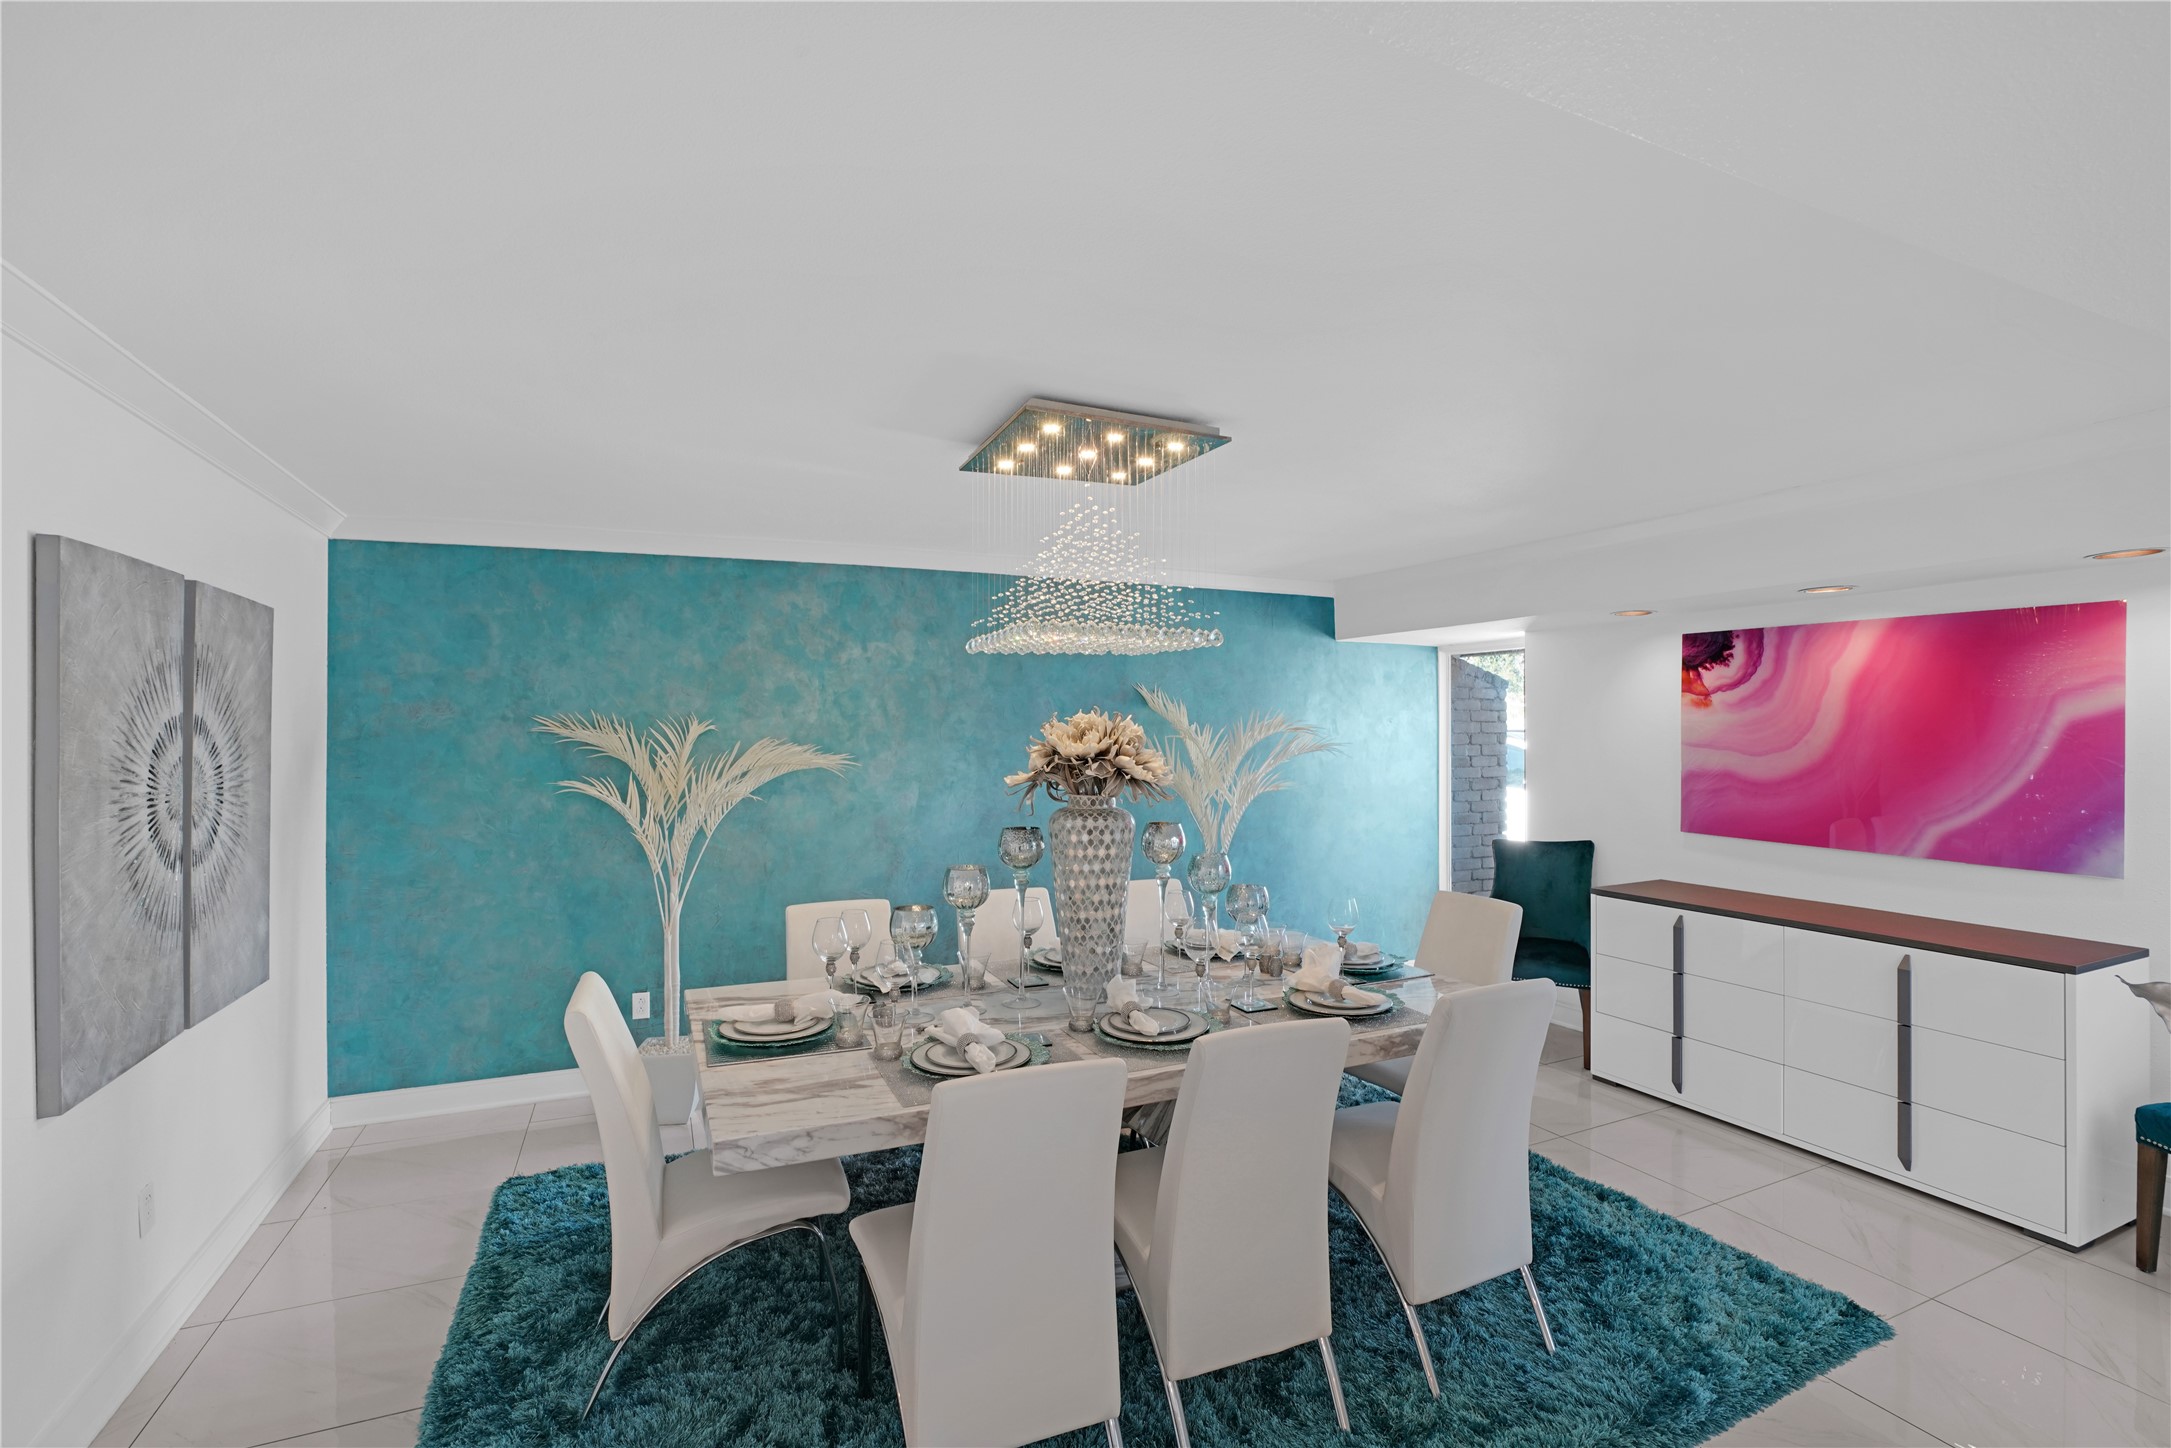 Front sitting room or formal dining room with Venetian plaster accent wall - showstopper!